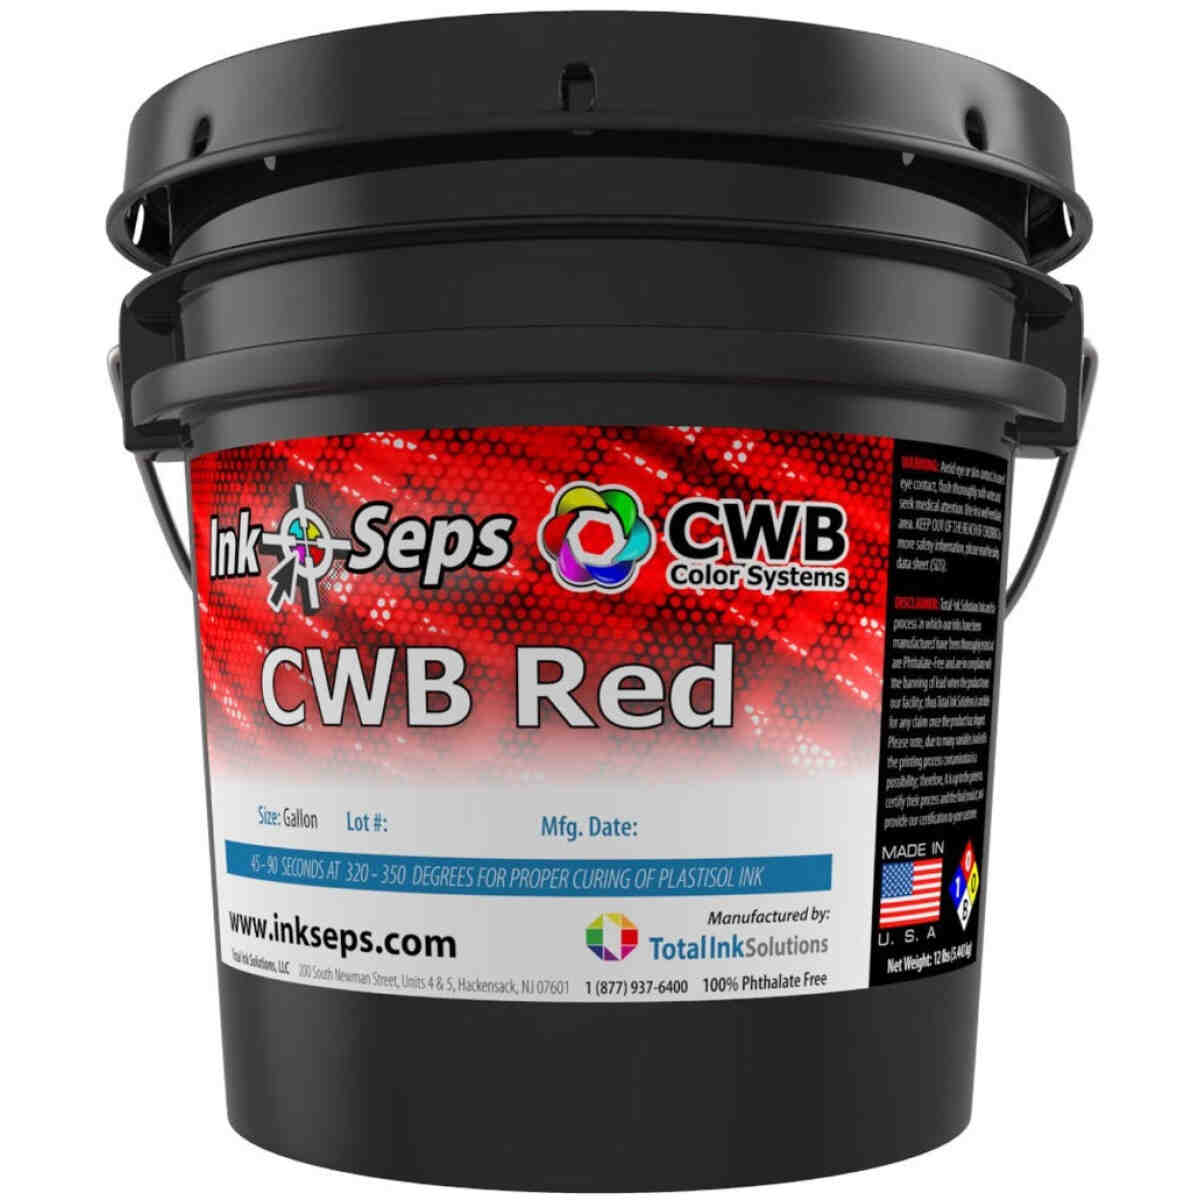 Cwb Red Simulated Process TOTAL INK SOLUTIONS®